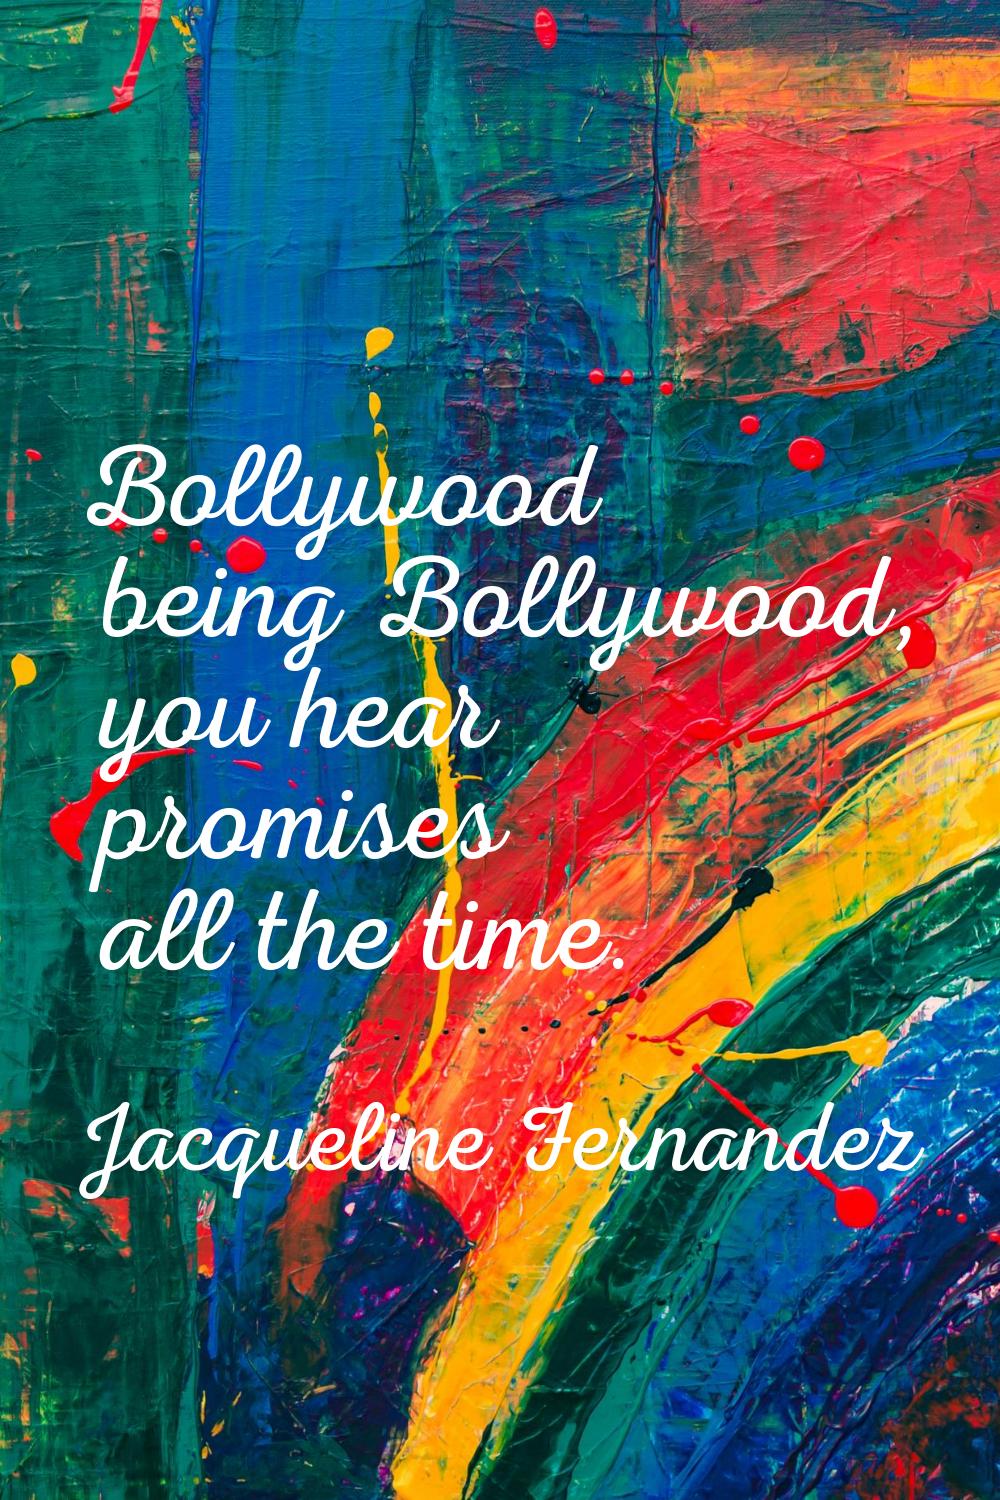 Bollywood being Bollywood, you hear promises all the time.